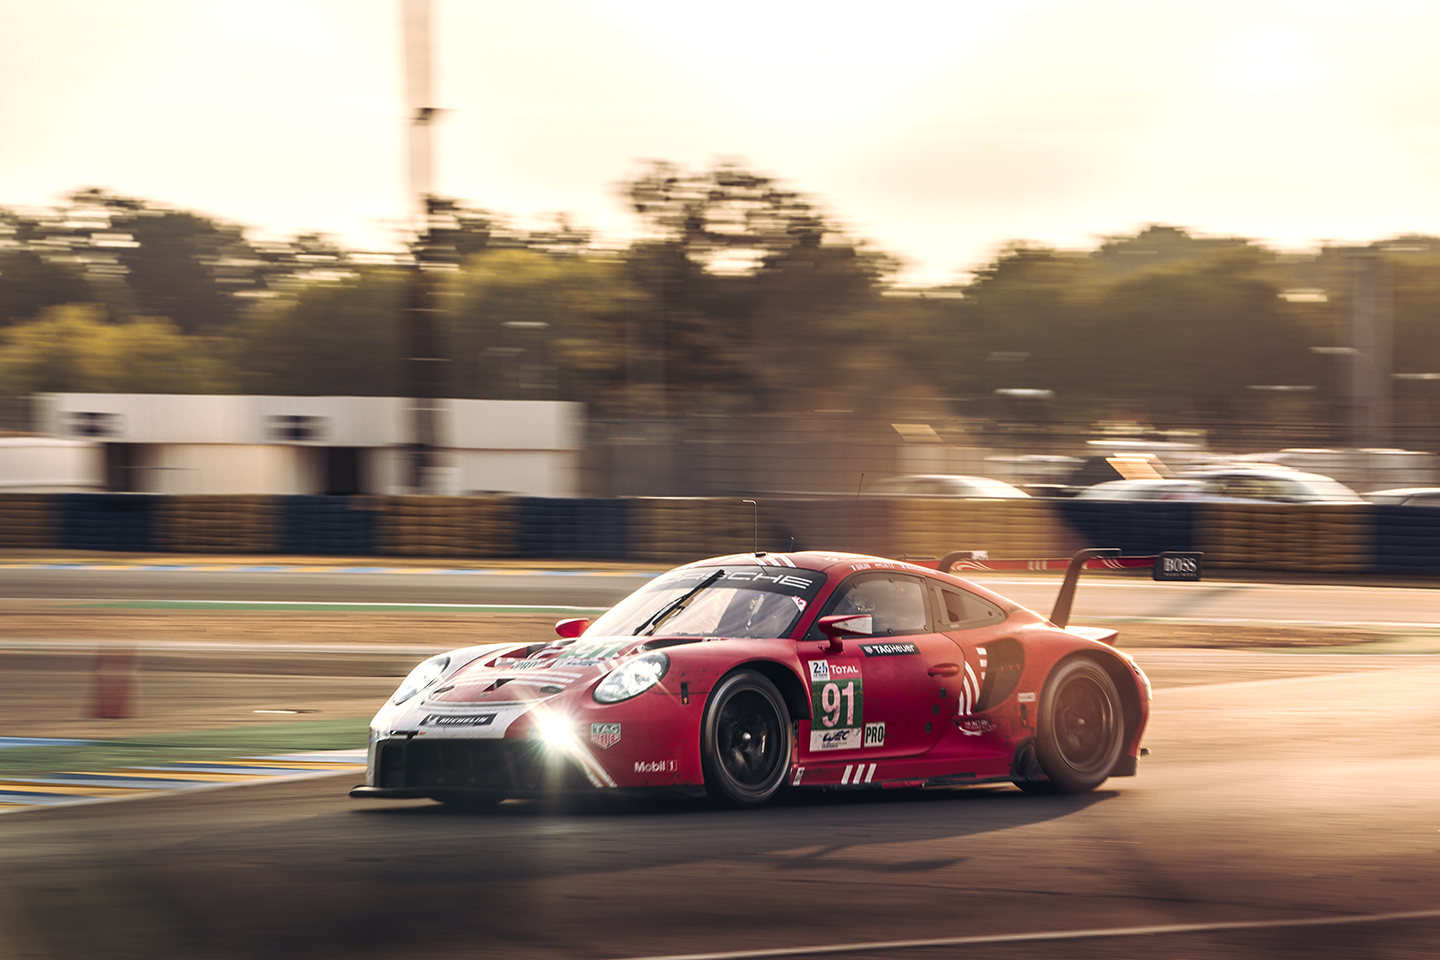 Red Porsche 911 RSR racecar on track at Le Mans in 2020